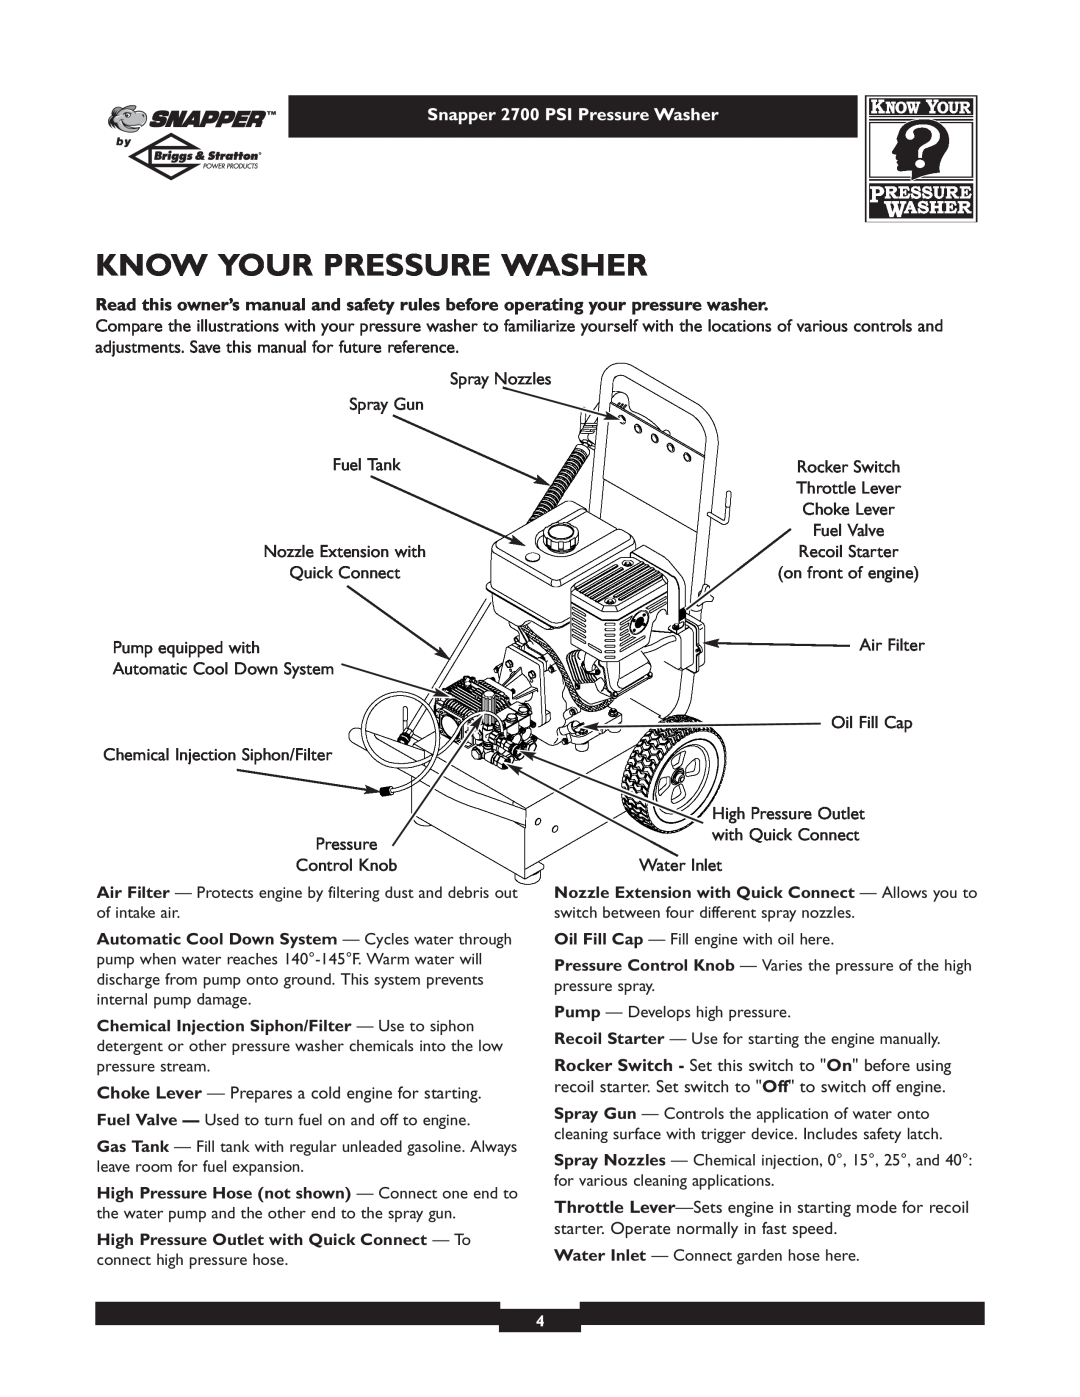 Briggs & Stratton 2700PSI owner manual Know Your Pressure Washer, High Pressure Outlet with Quick Connect - To 